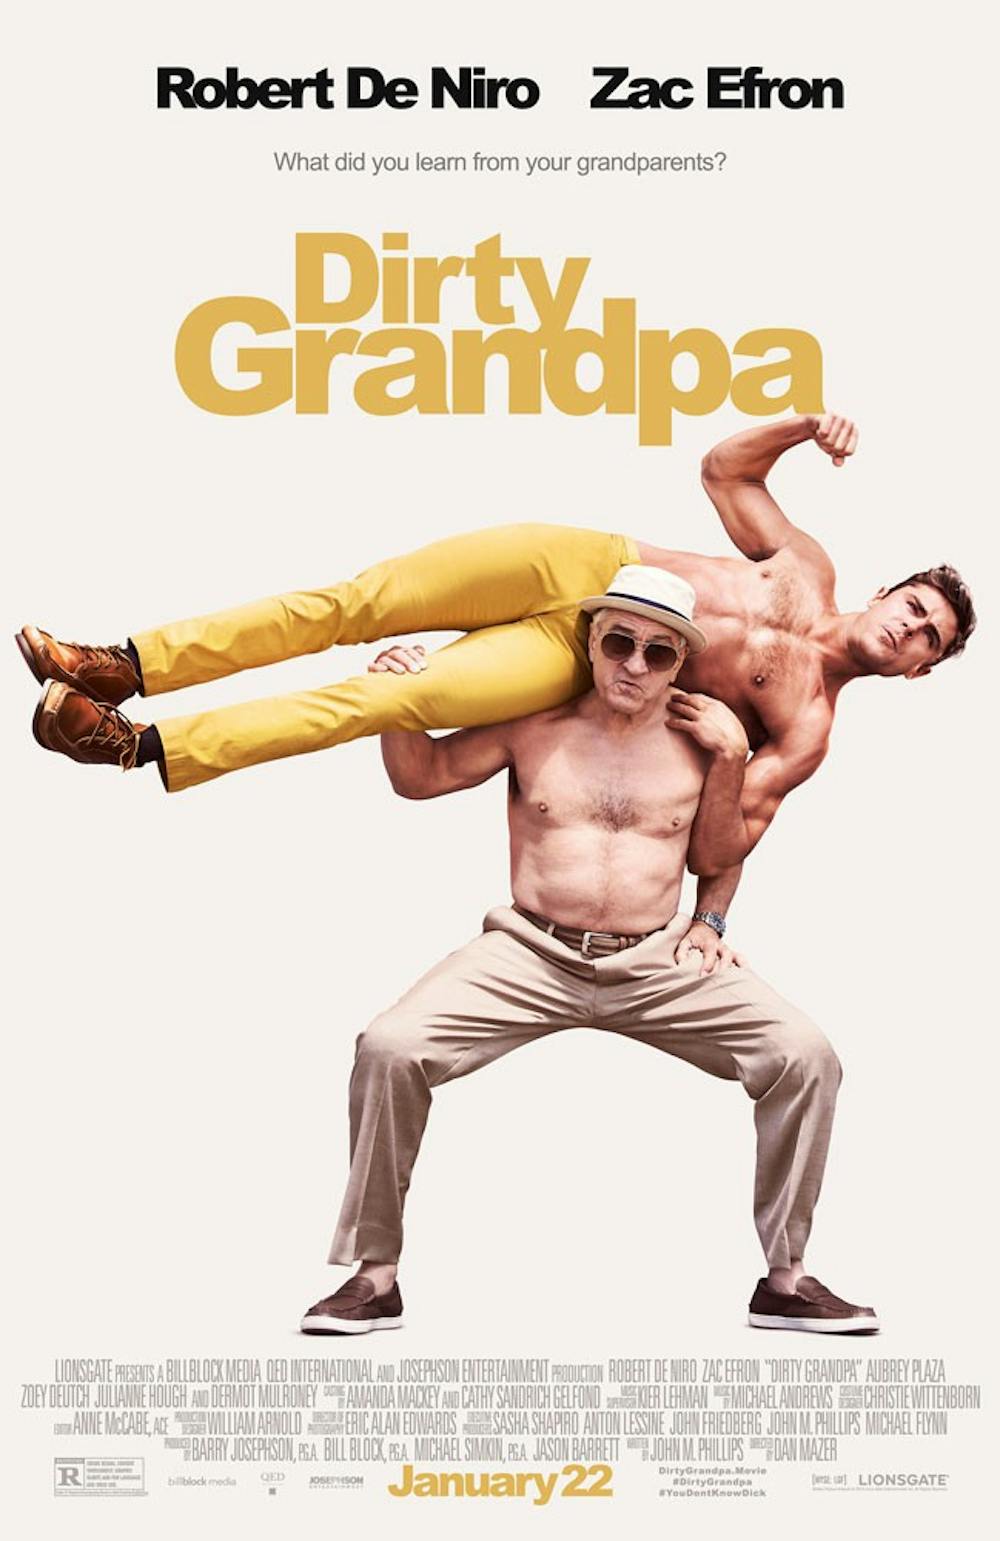 <p>Robert De Niro and Zac Efron battle it out in "Dirty Grandpa," a raunchy comedy about a grandson and grandfather&nbsp;who take a road trip together to Daytona Beach.</p>